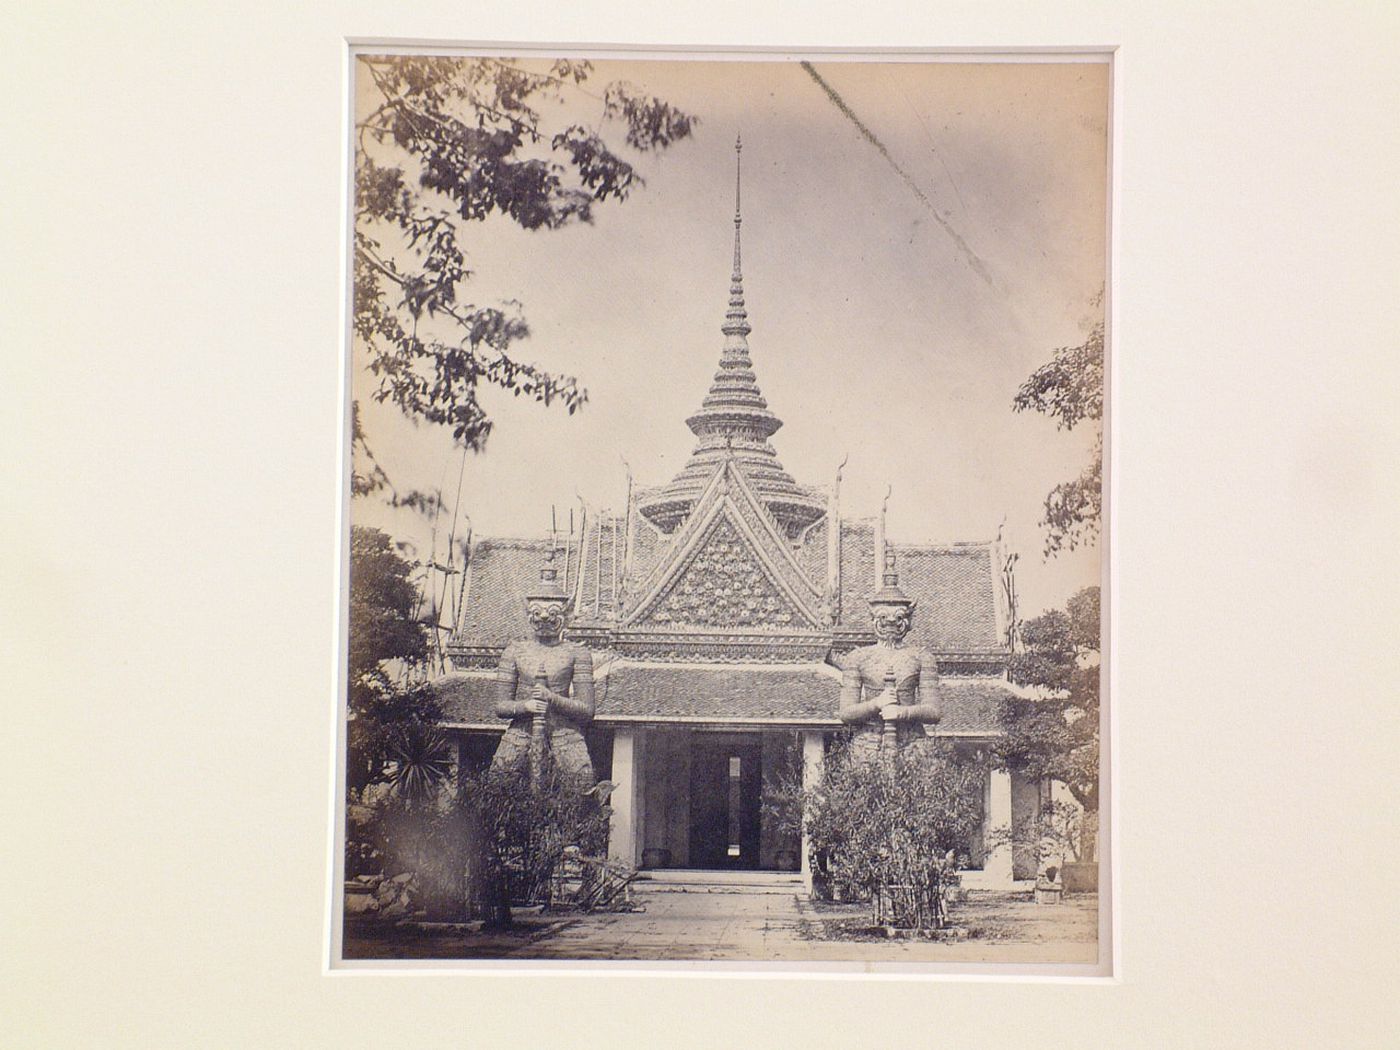 View of the entrance to Phra Thinang Amarin Winichai (also known as the Audience Hall of Amarindra Vinitchai) showing a stupa and two guardian demon statues, Phraborommamaharatchawang (also known as the Grand Palace) complex, Bangkok, Siam (now Thailand)